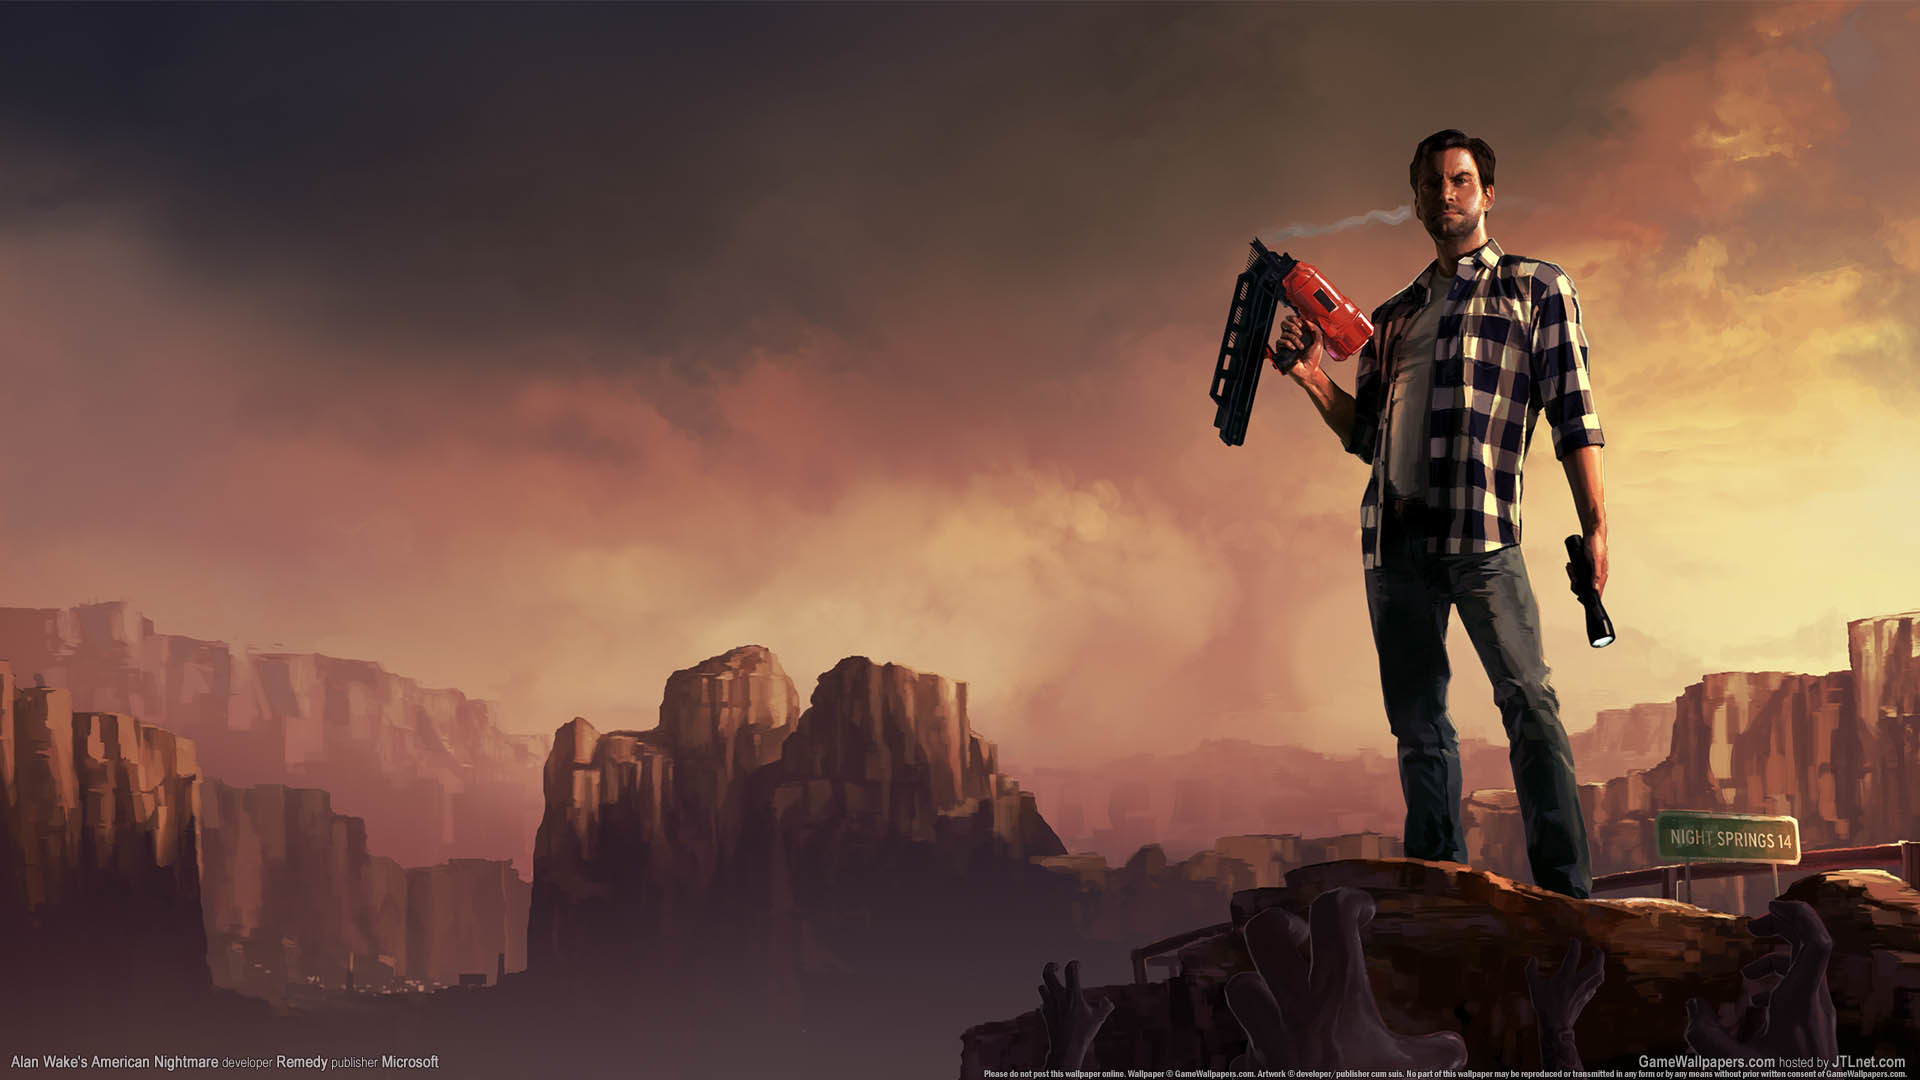 1920x1080 Alan Wake's American Nightmare wallpaper or background Alan Wake's American  Nightmare wallpaper or background 01